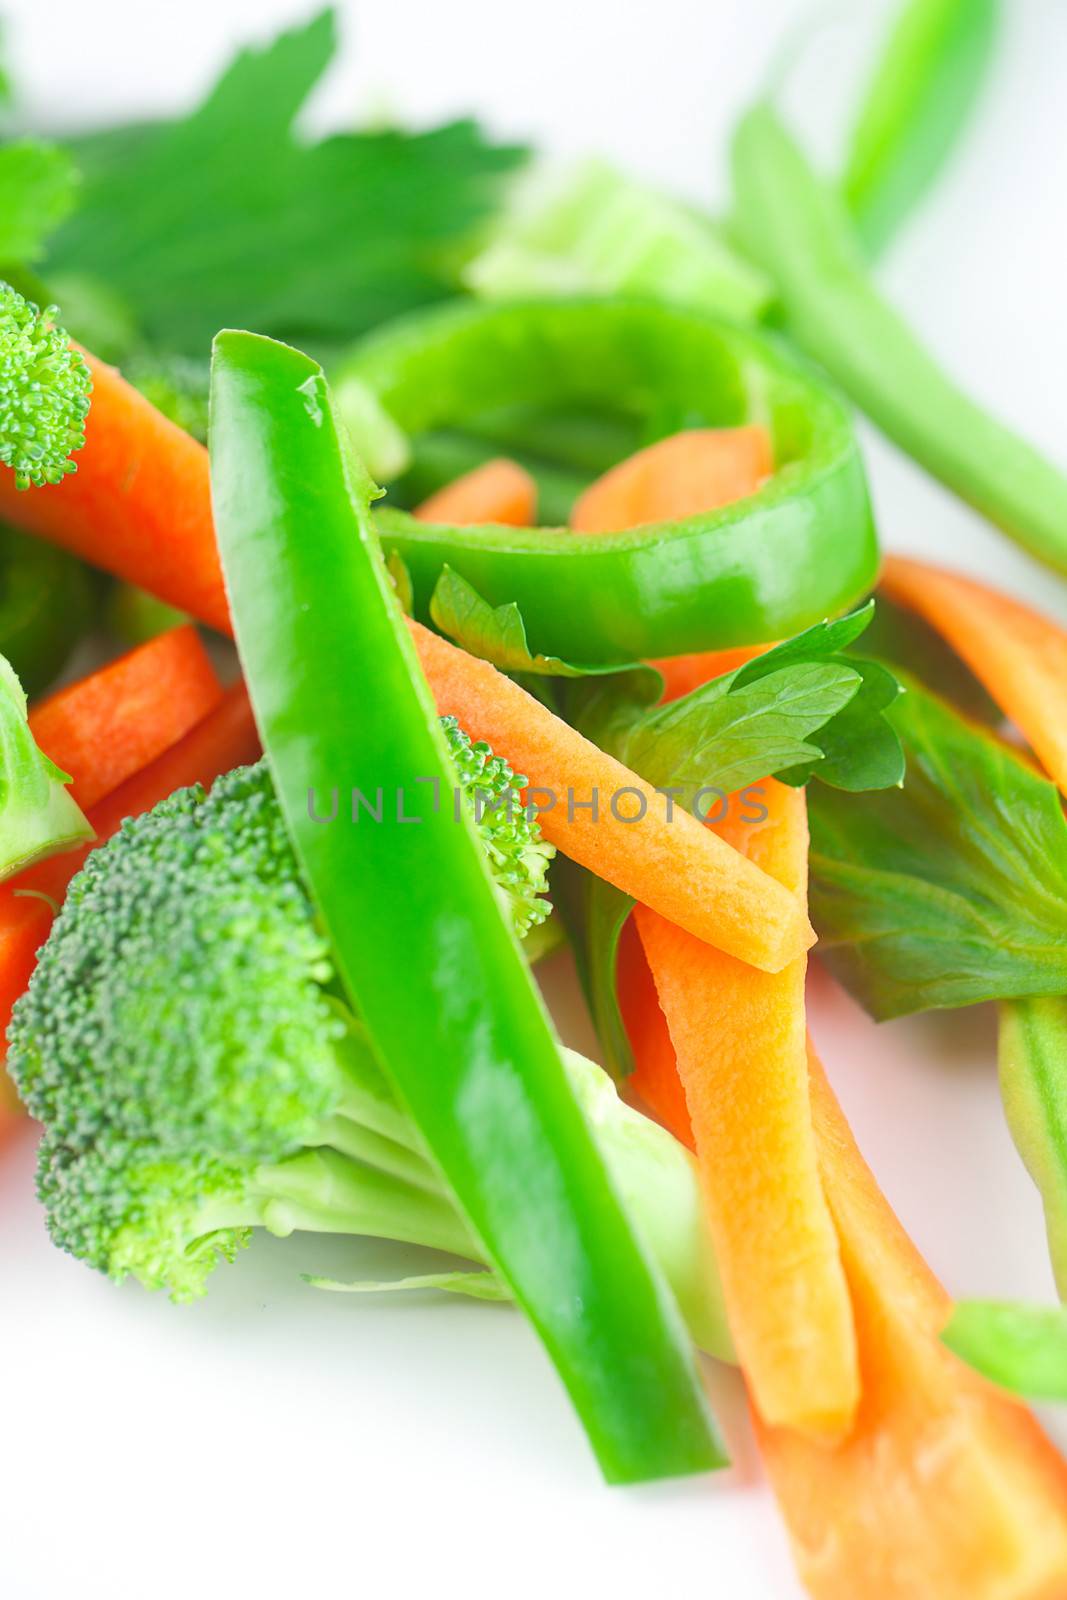 carrot, celery, broccoli and pepper isolated on white